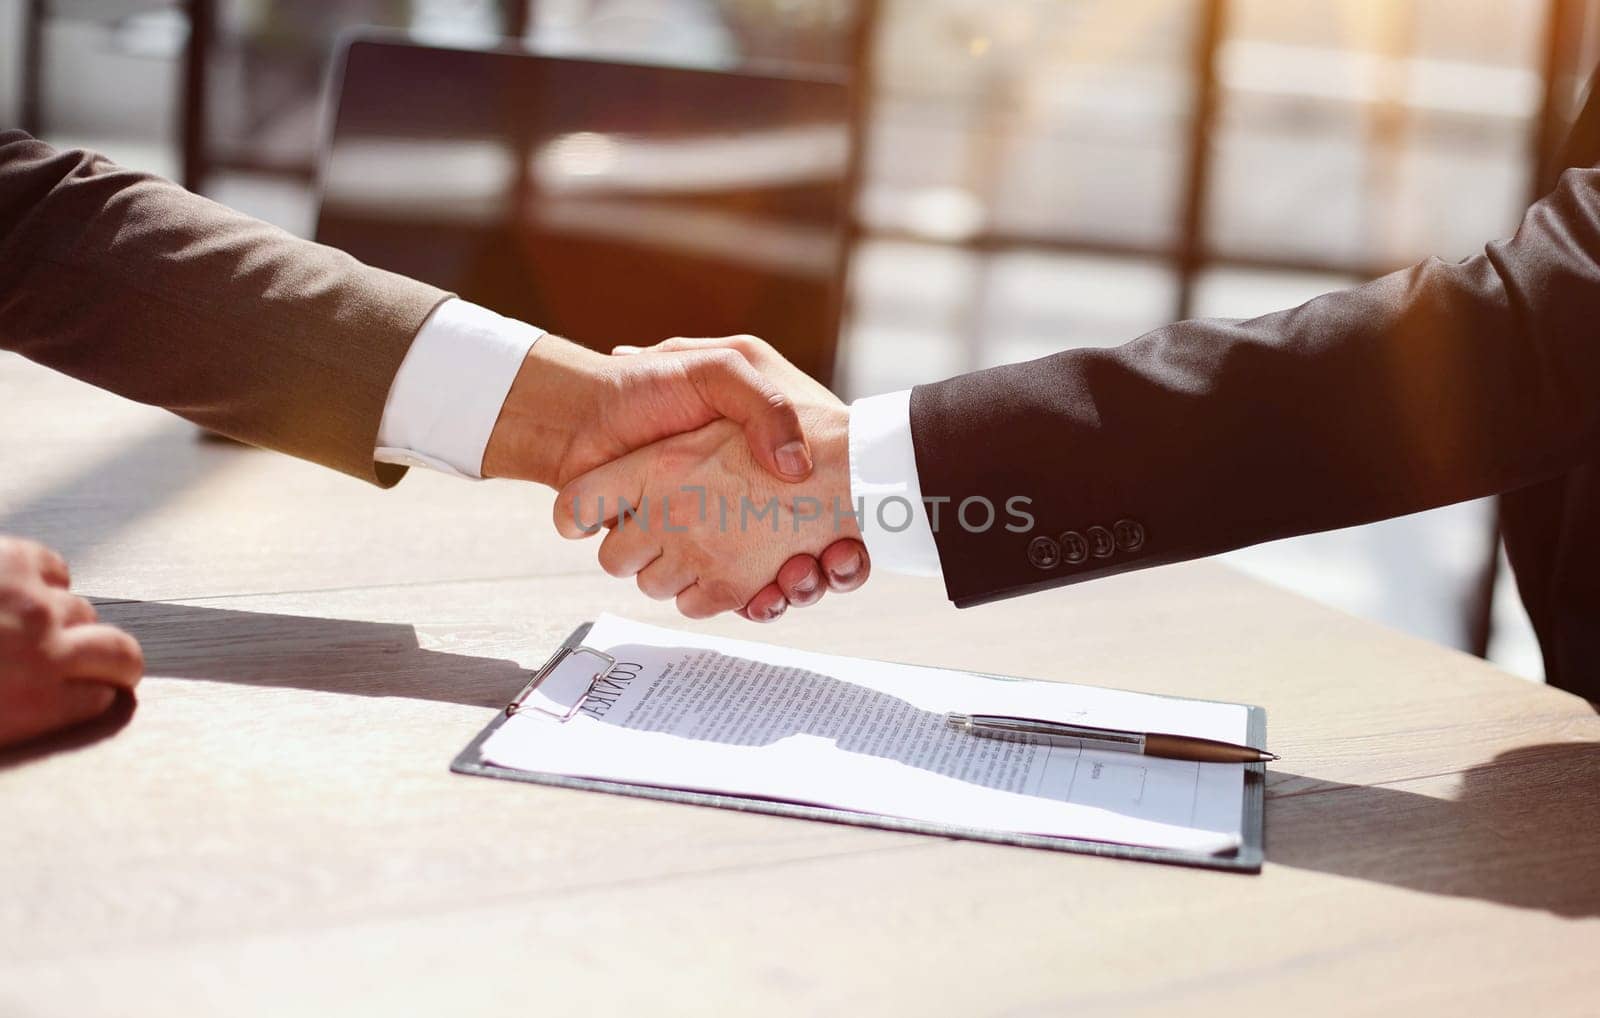 Successful business people handshaking after good deal.